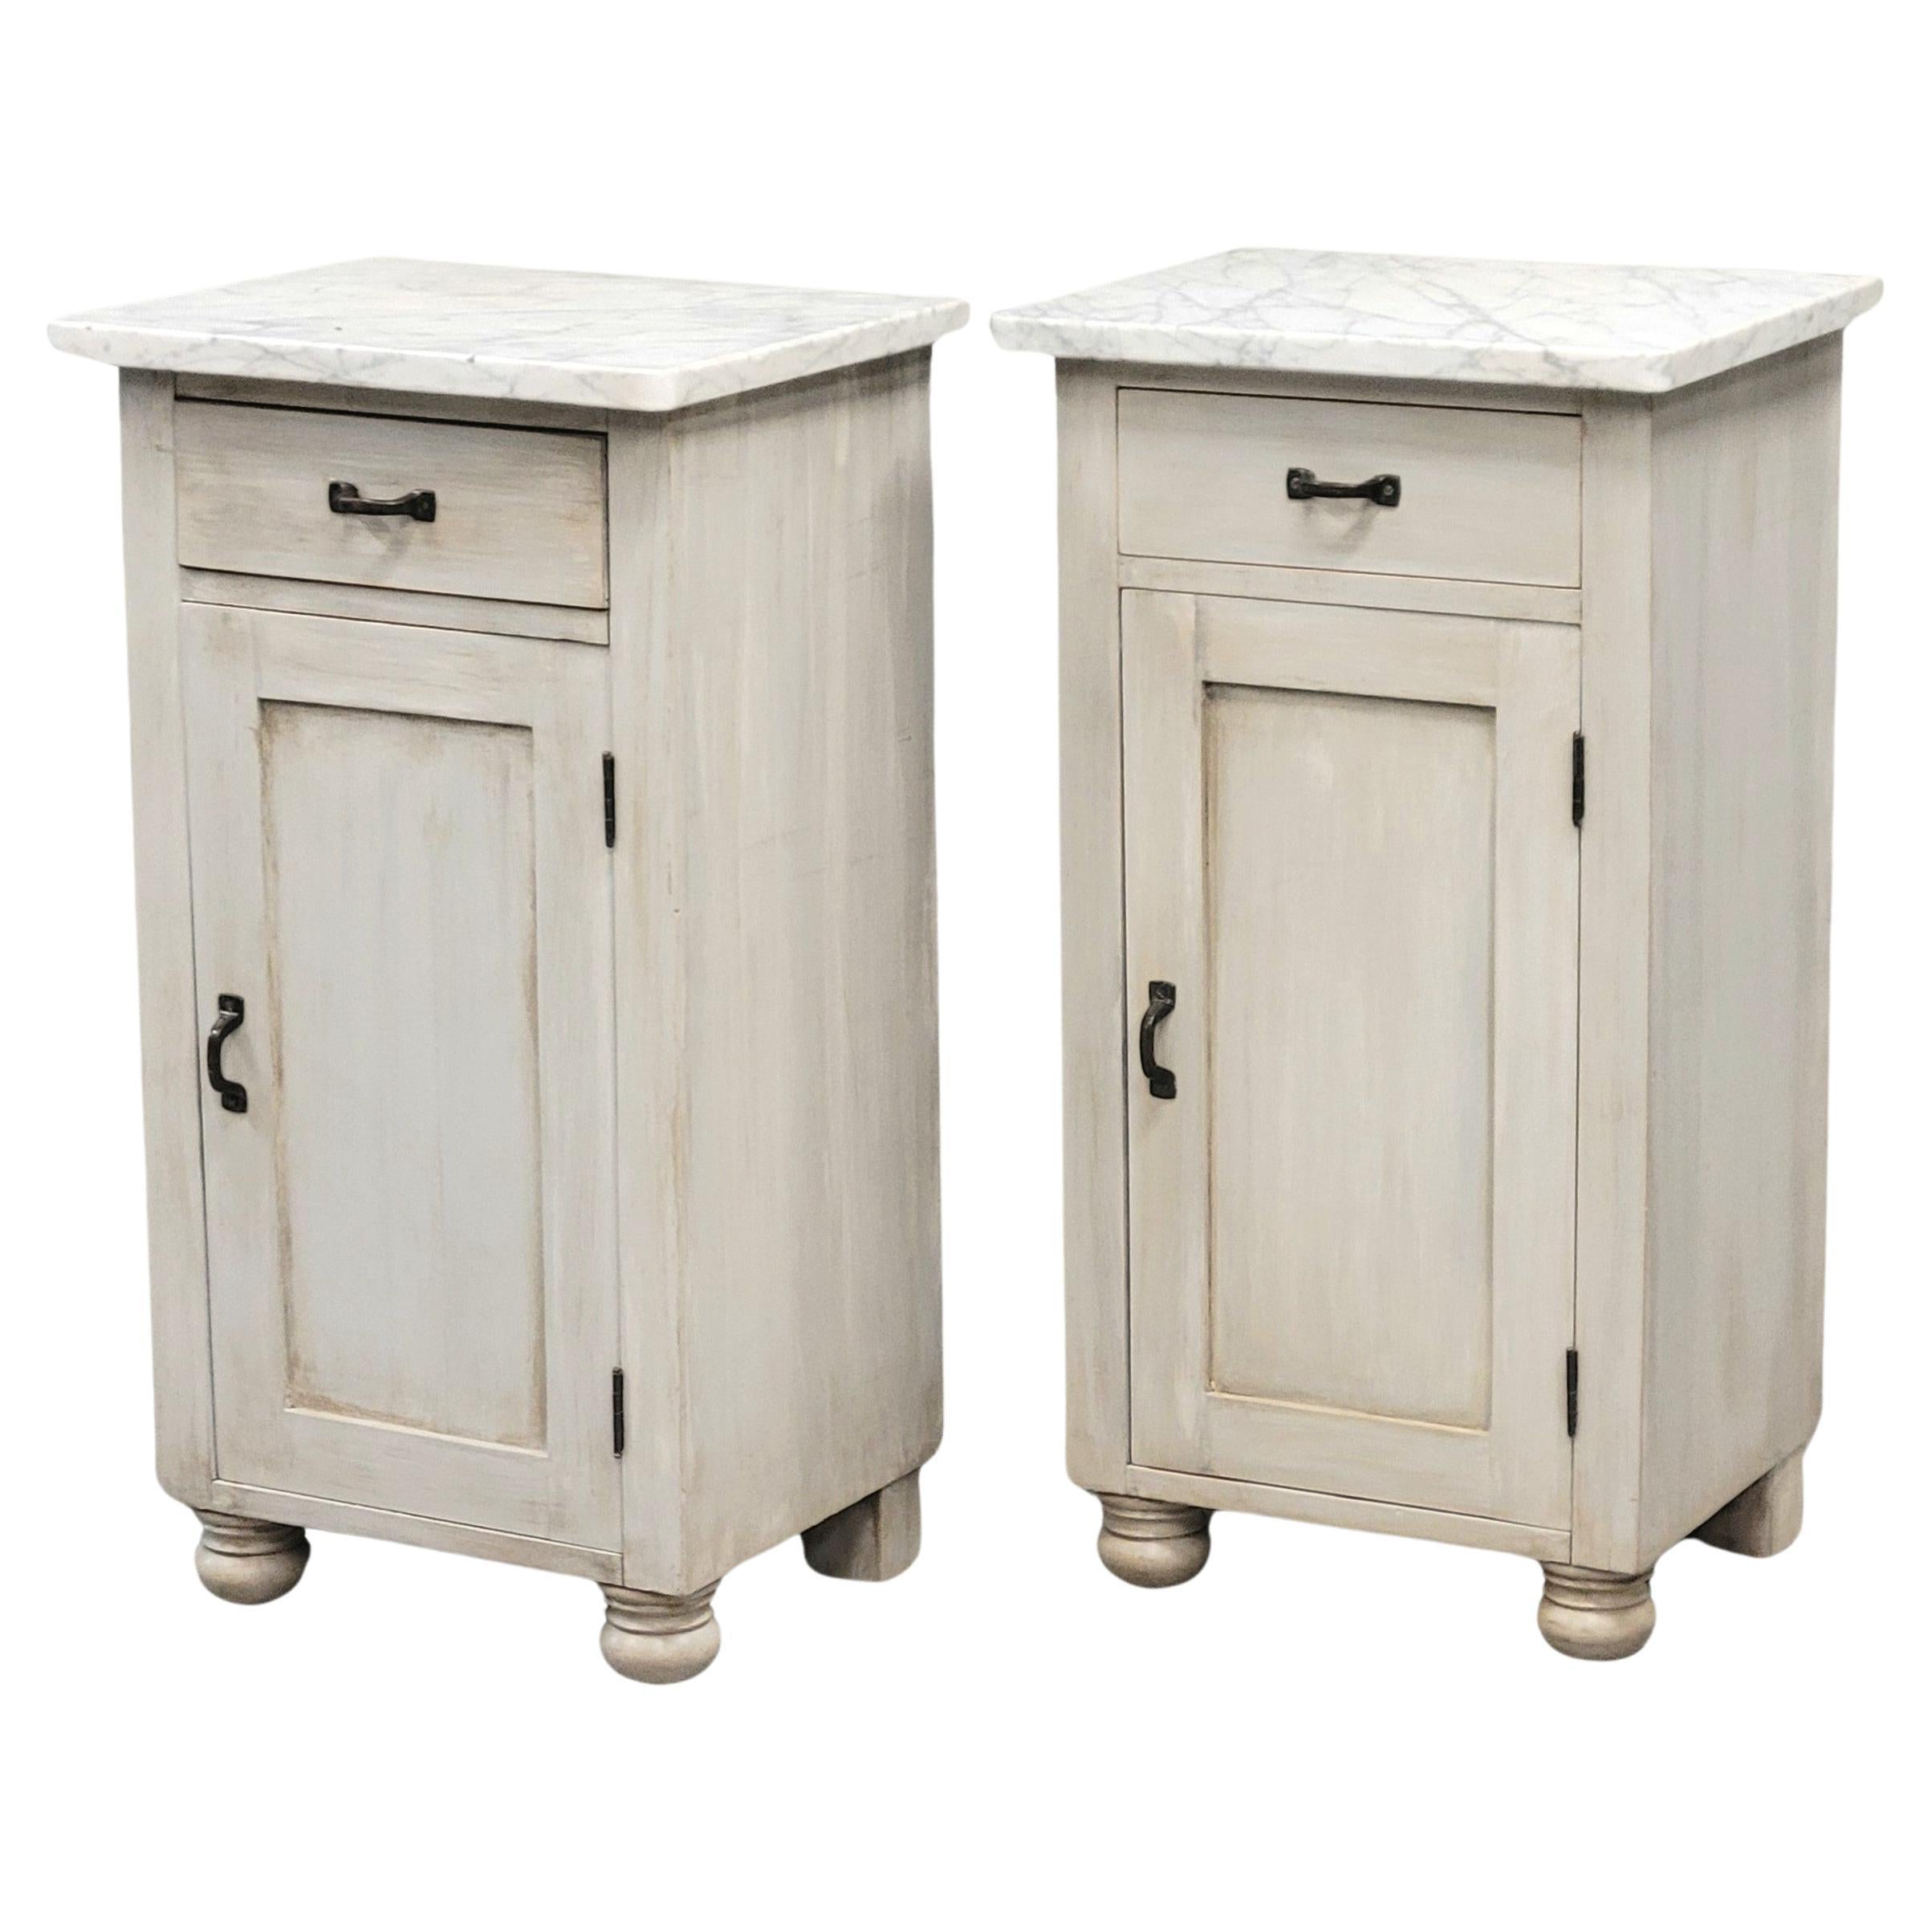 Pair of Vintage Painted Pine Nightstands With Carrera Marble Tops For Sale